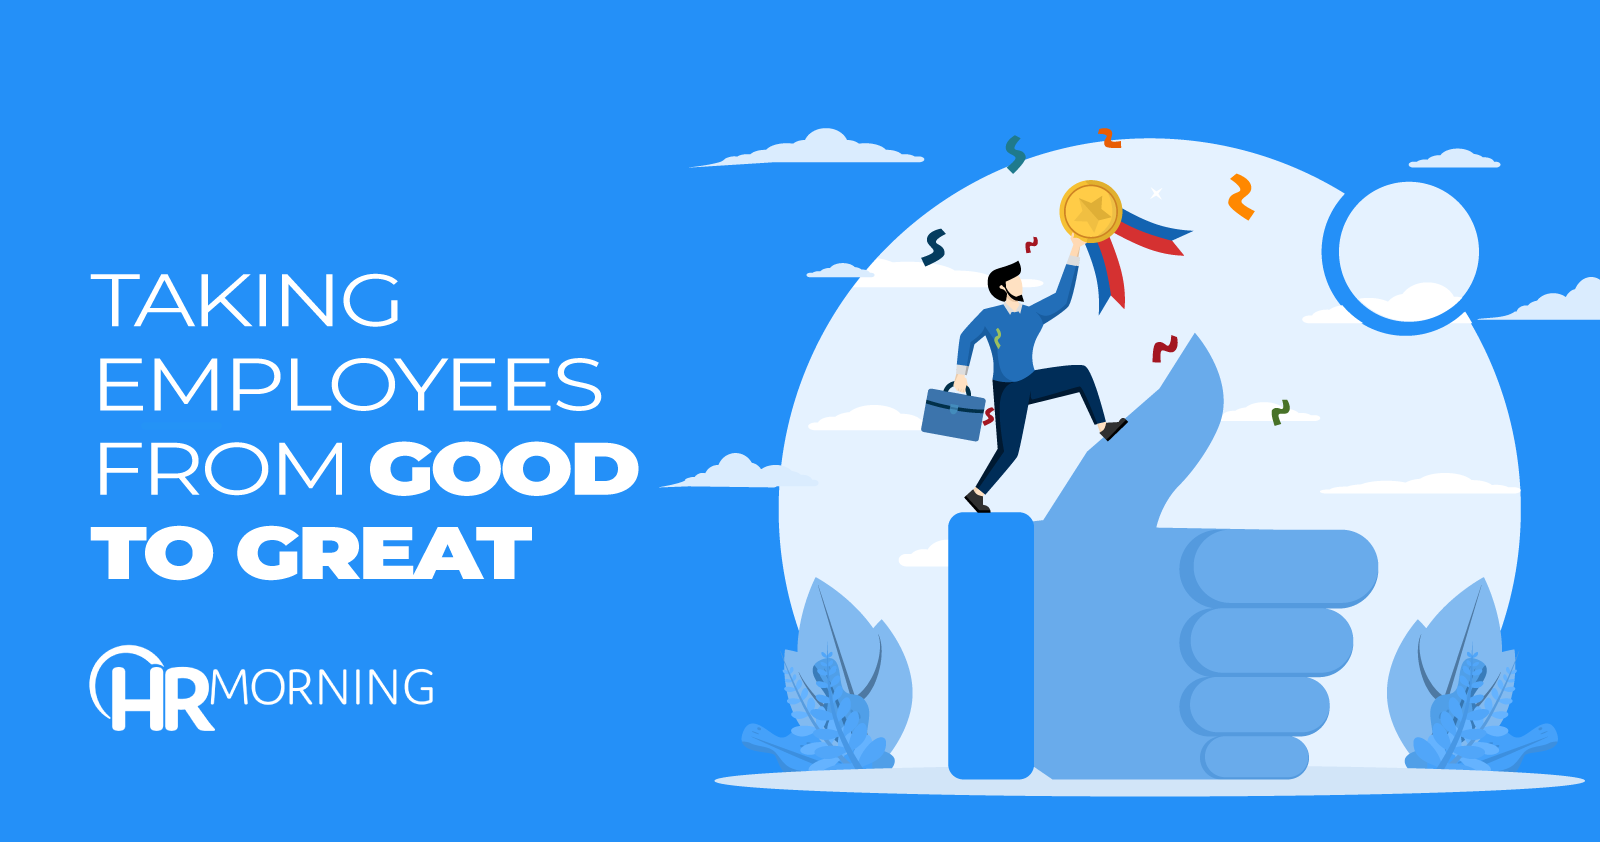 Taking employees from good to great